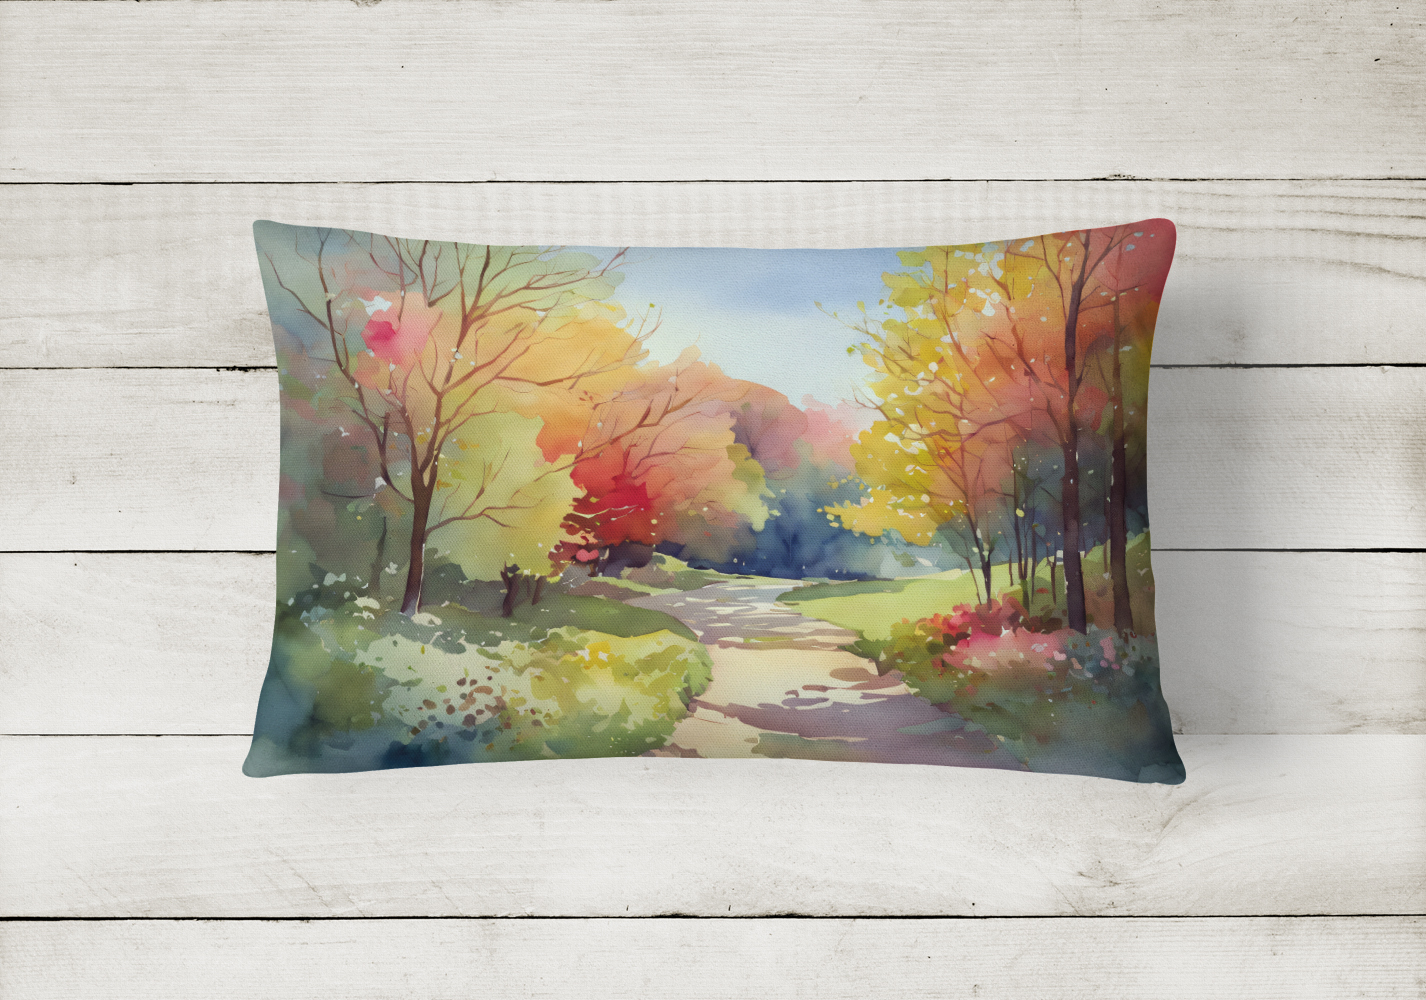 North Carolina Dogwoods in Watercolor Fabric Decorative Pillow - image 2 of 4